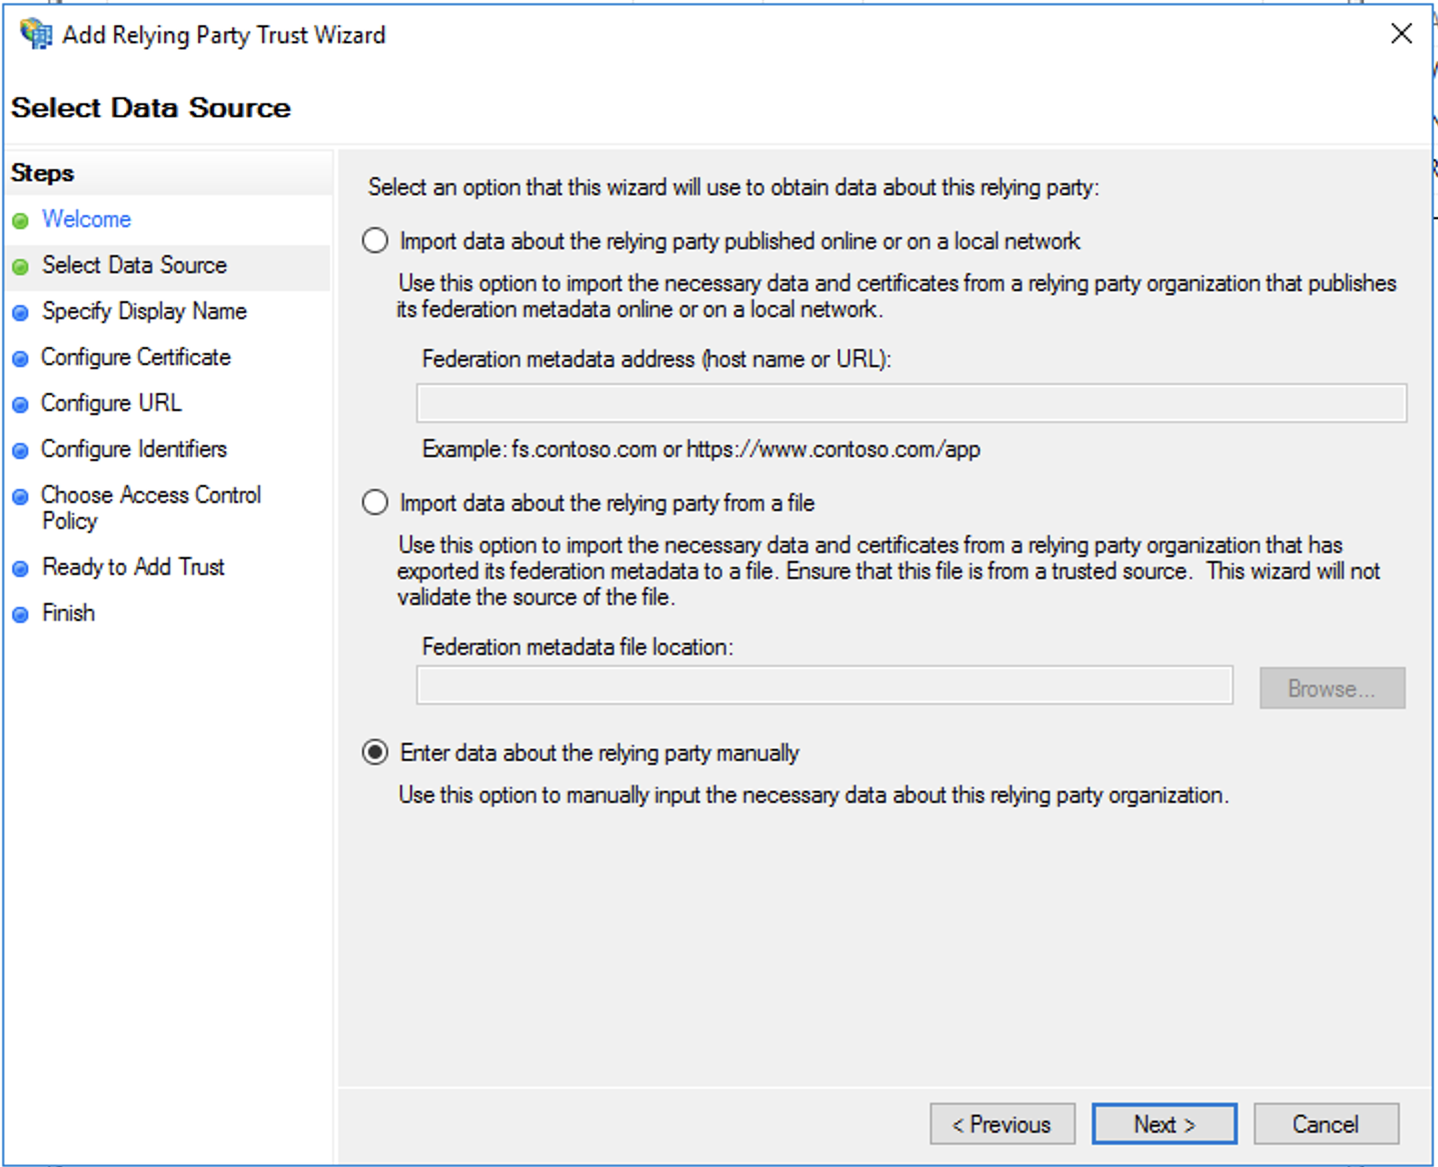 Add relying party trust wizard, select data source step